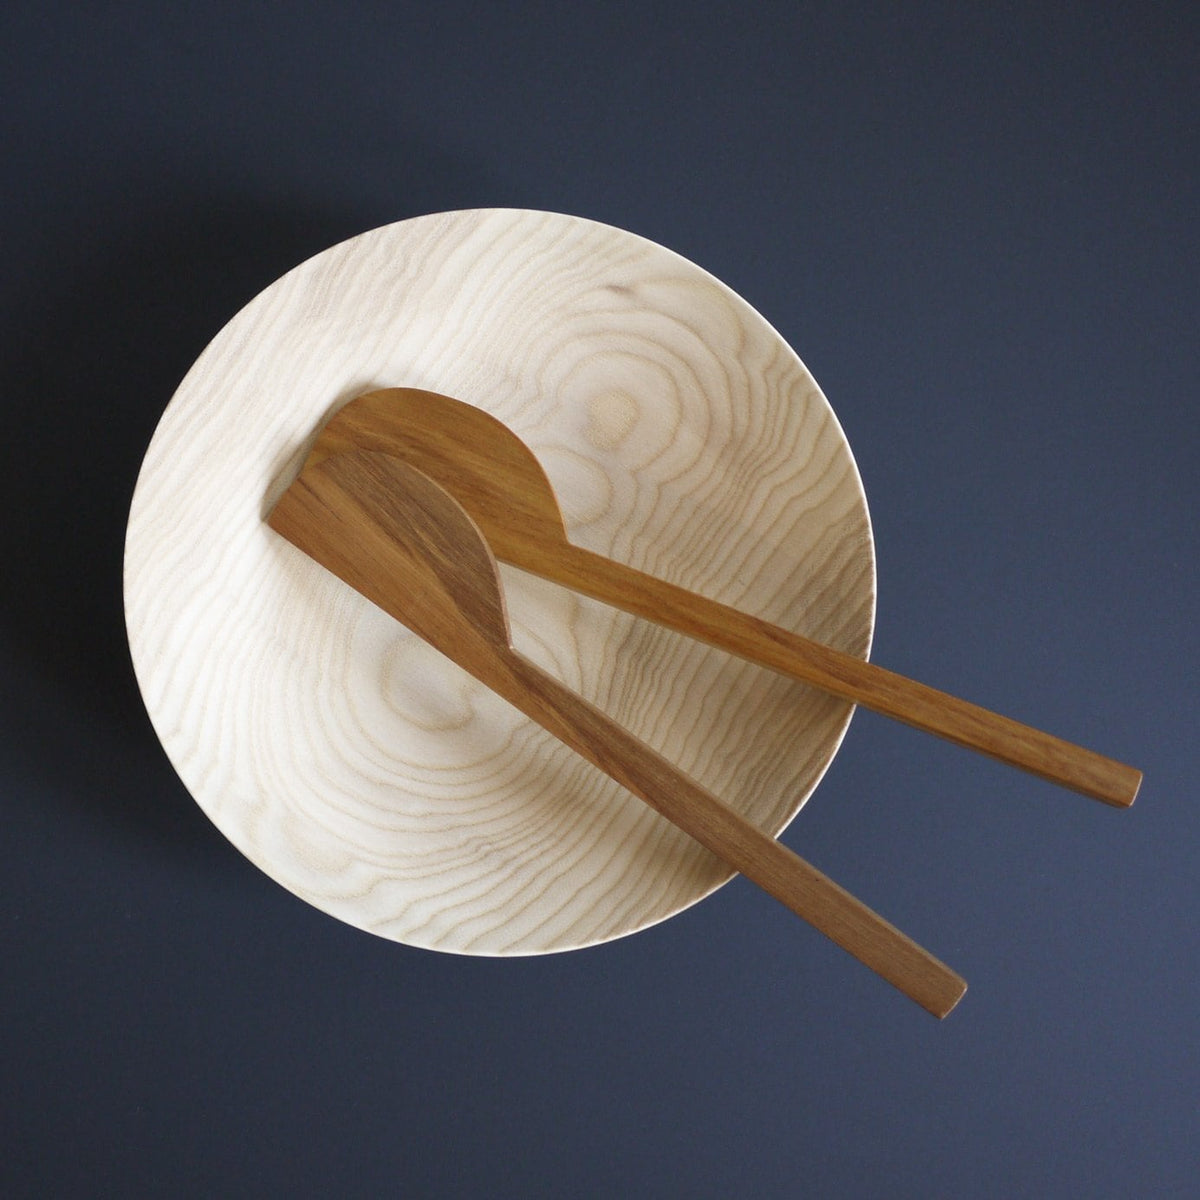 Two Wooden Plates - Small by Kihachi in a wooden bowl.